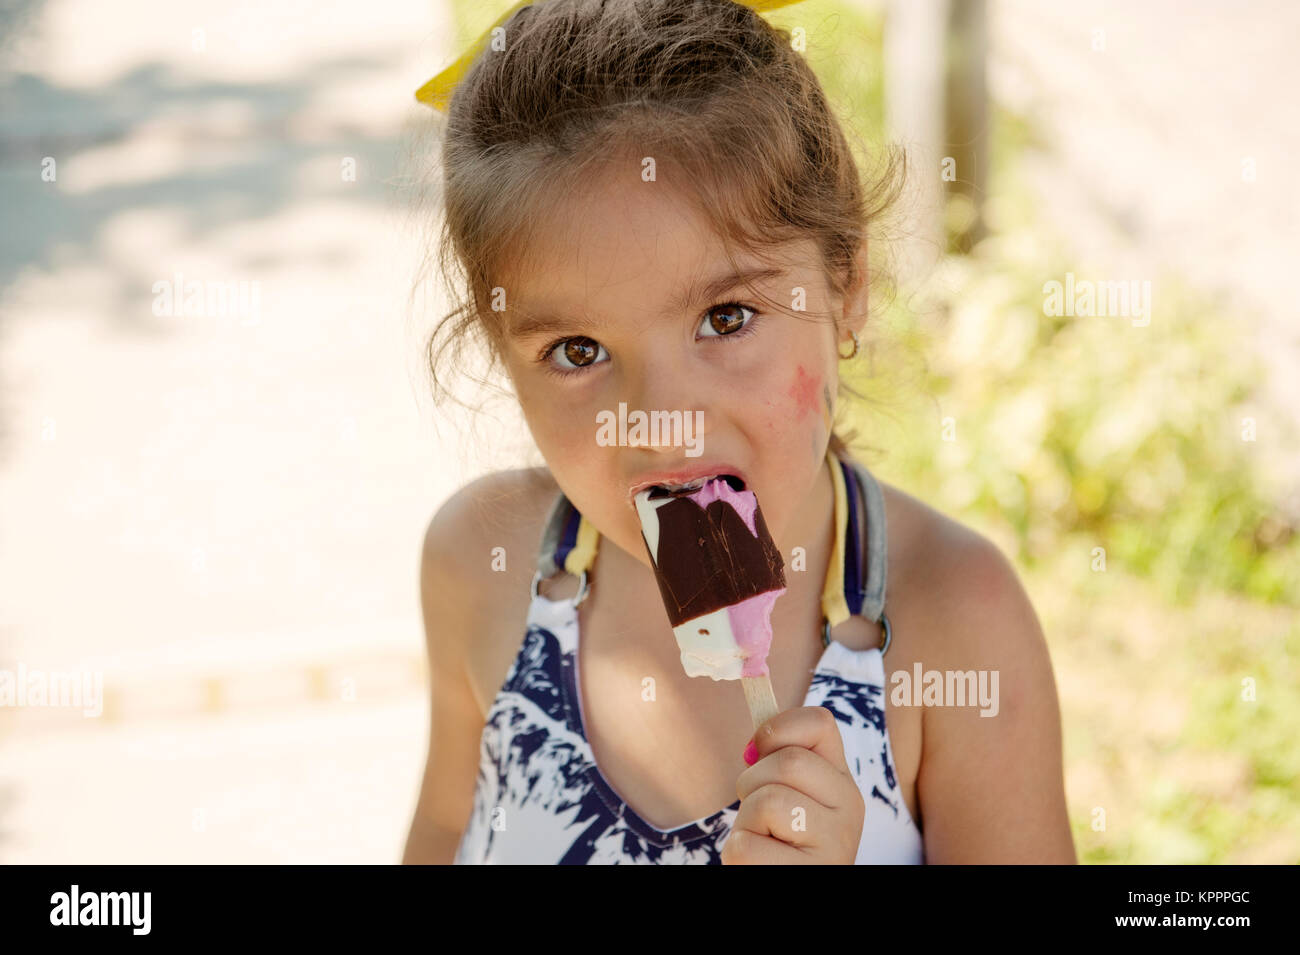 Little girl eating ice cream Banque D'Images